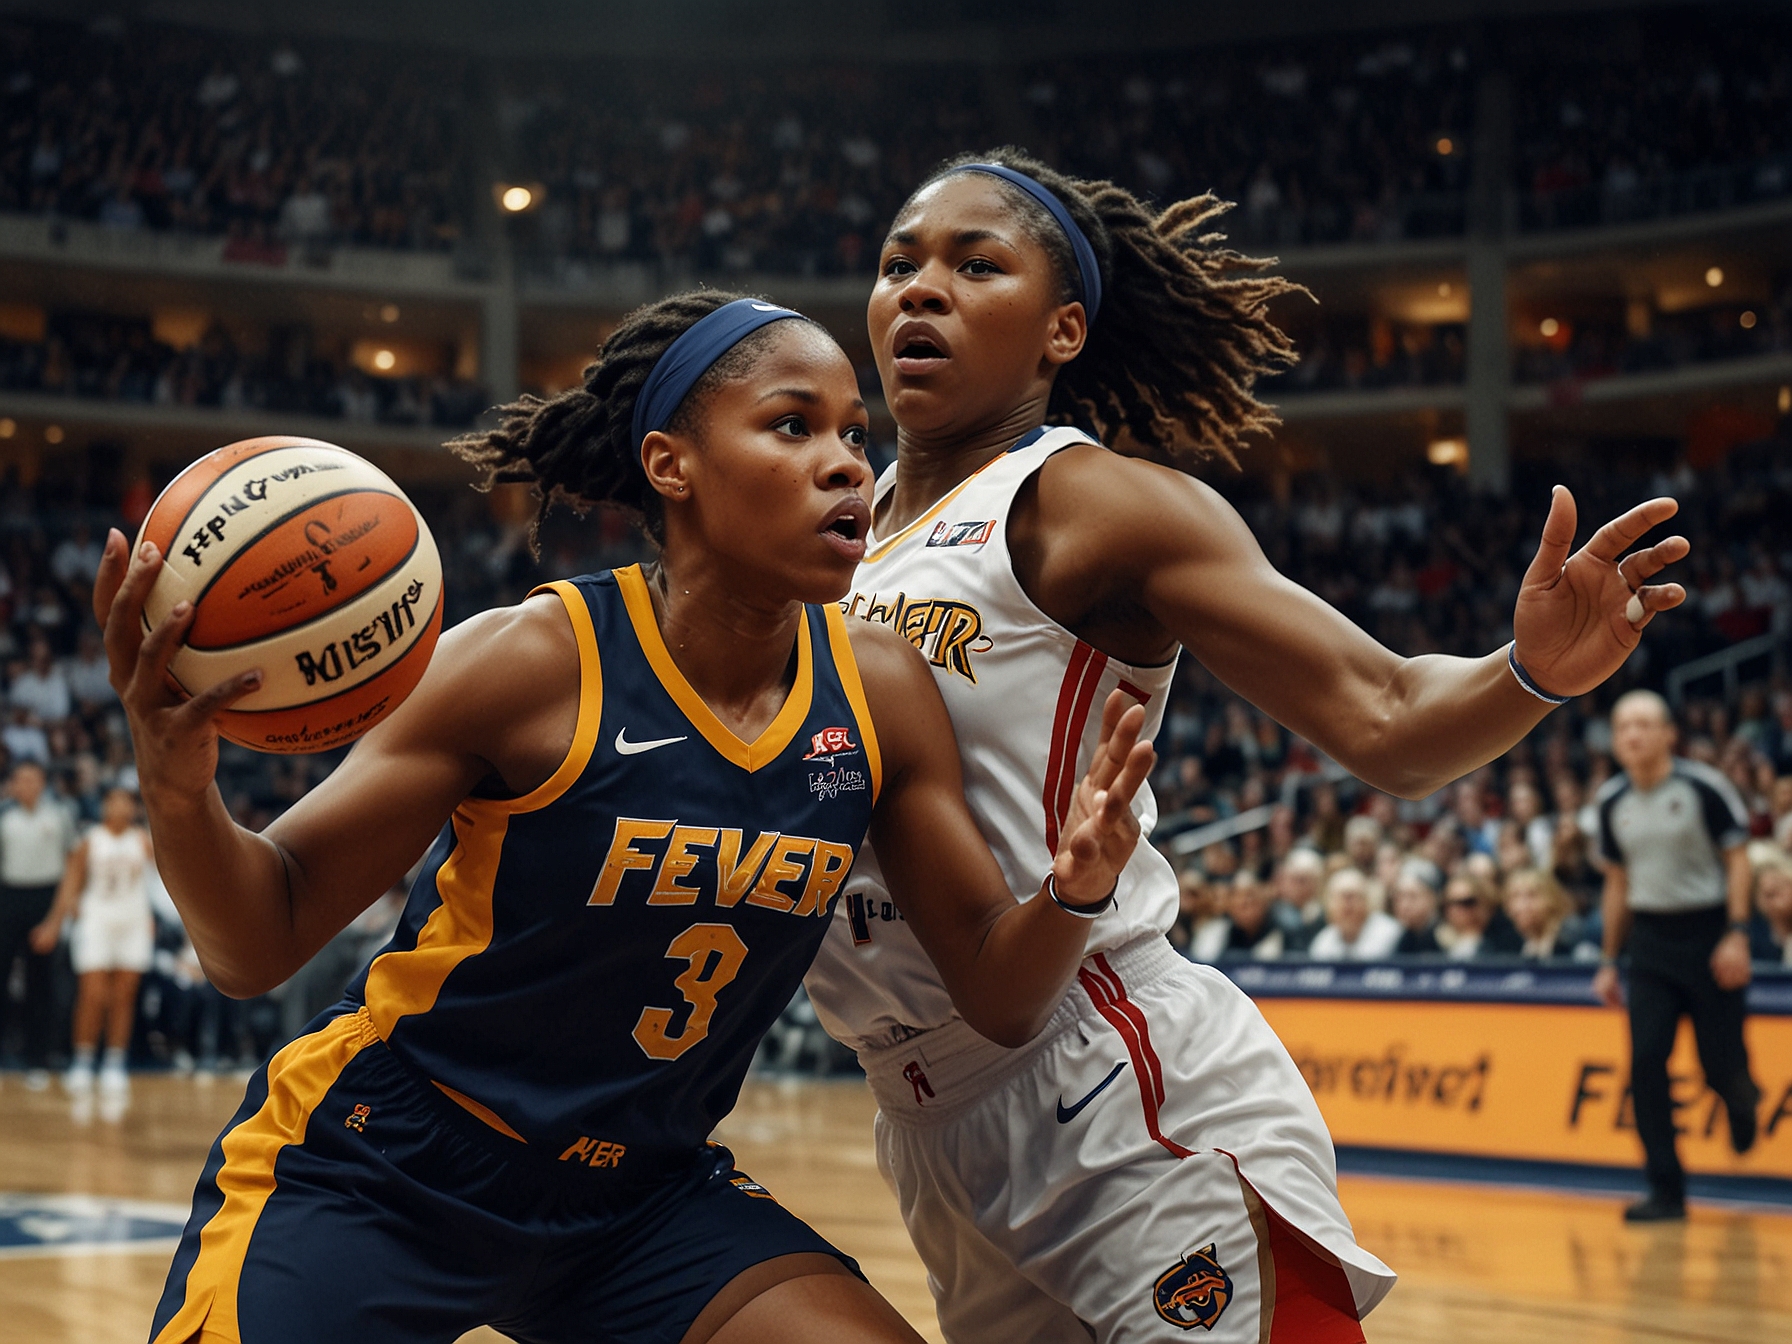 Angel Reese of Indiana Fever defending aggressively against an opponent during a tense moment in the game.